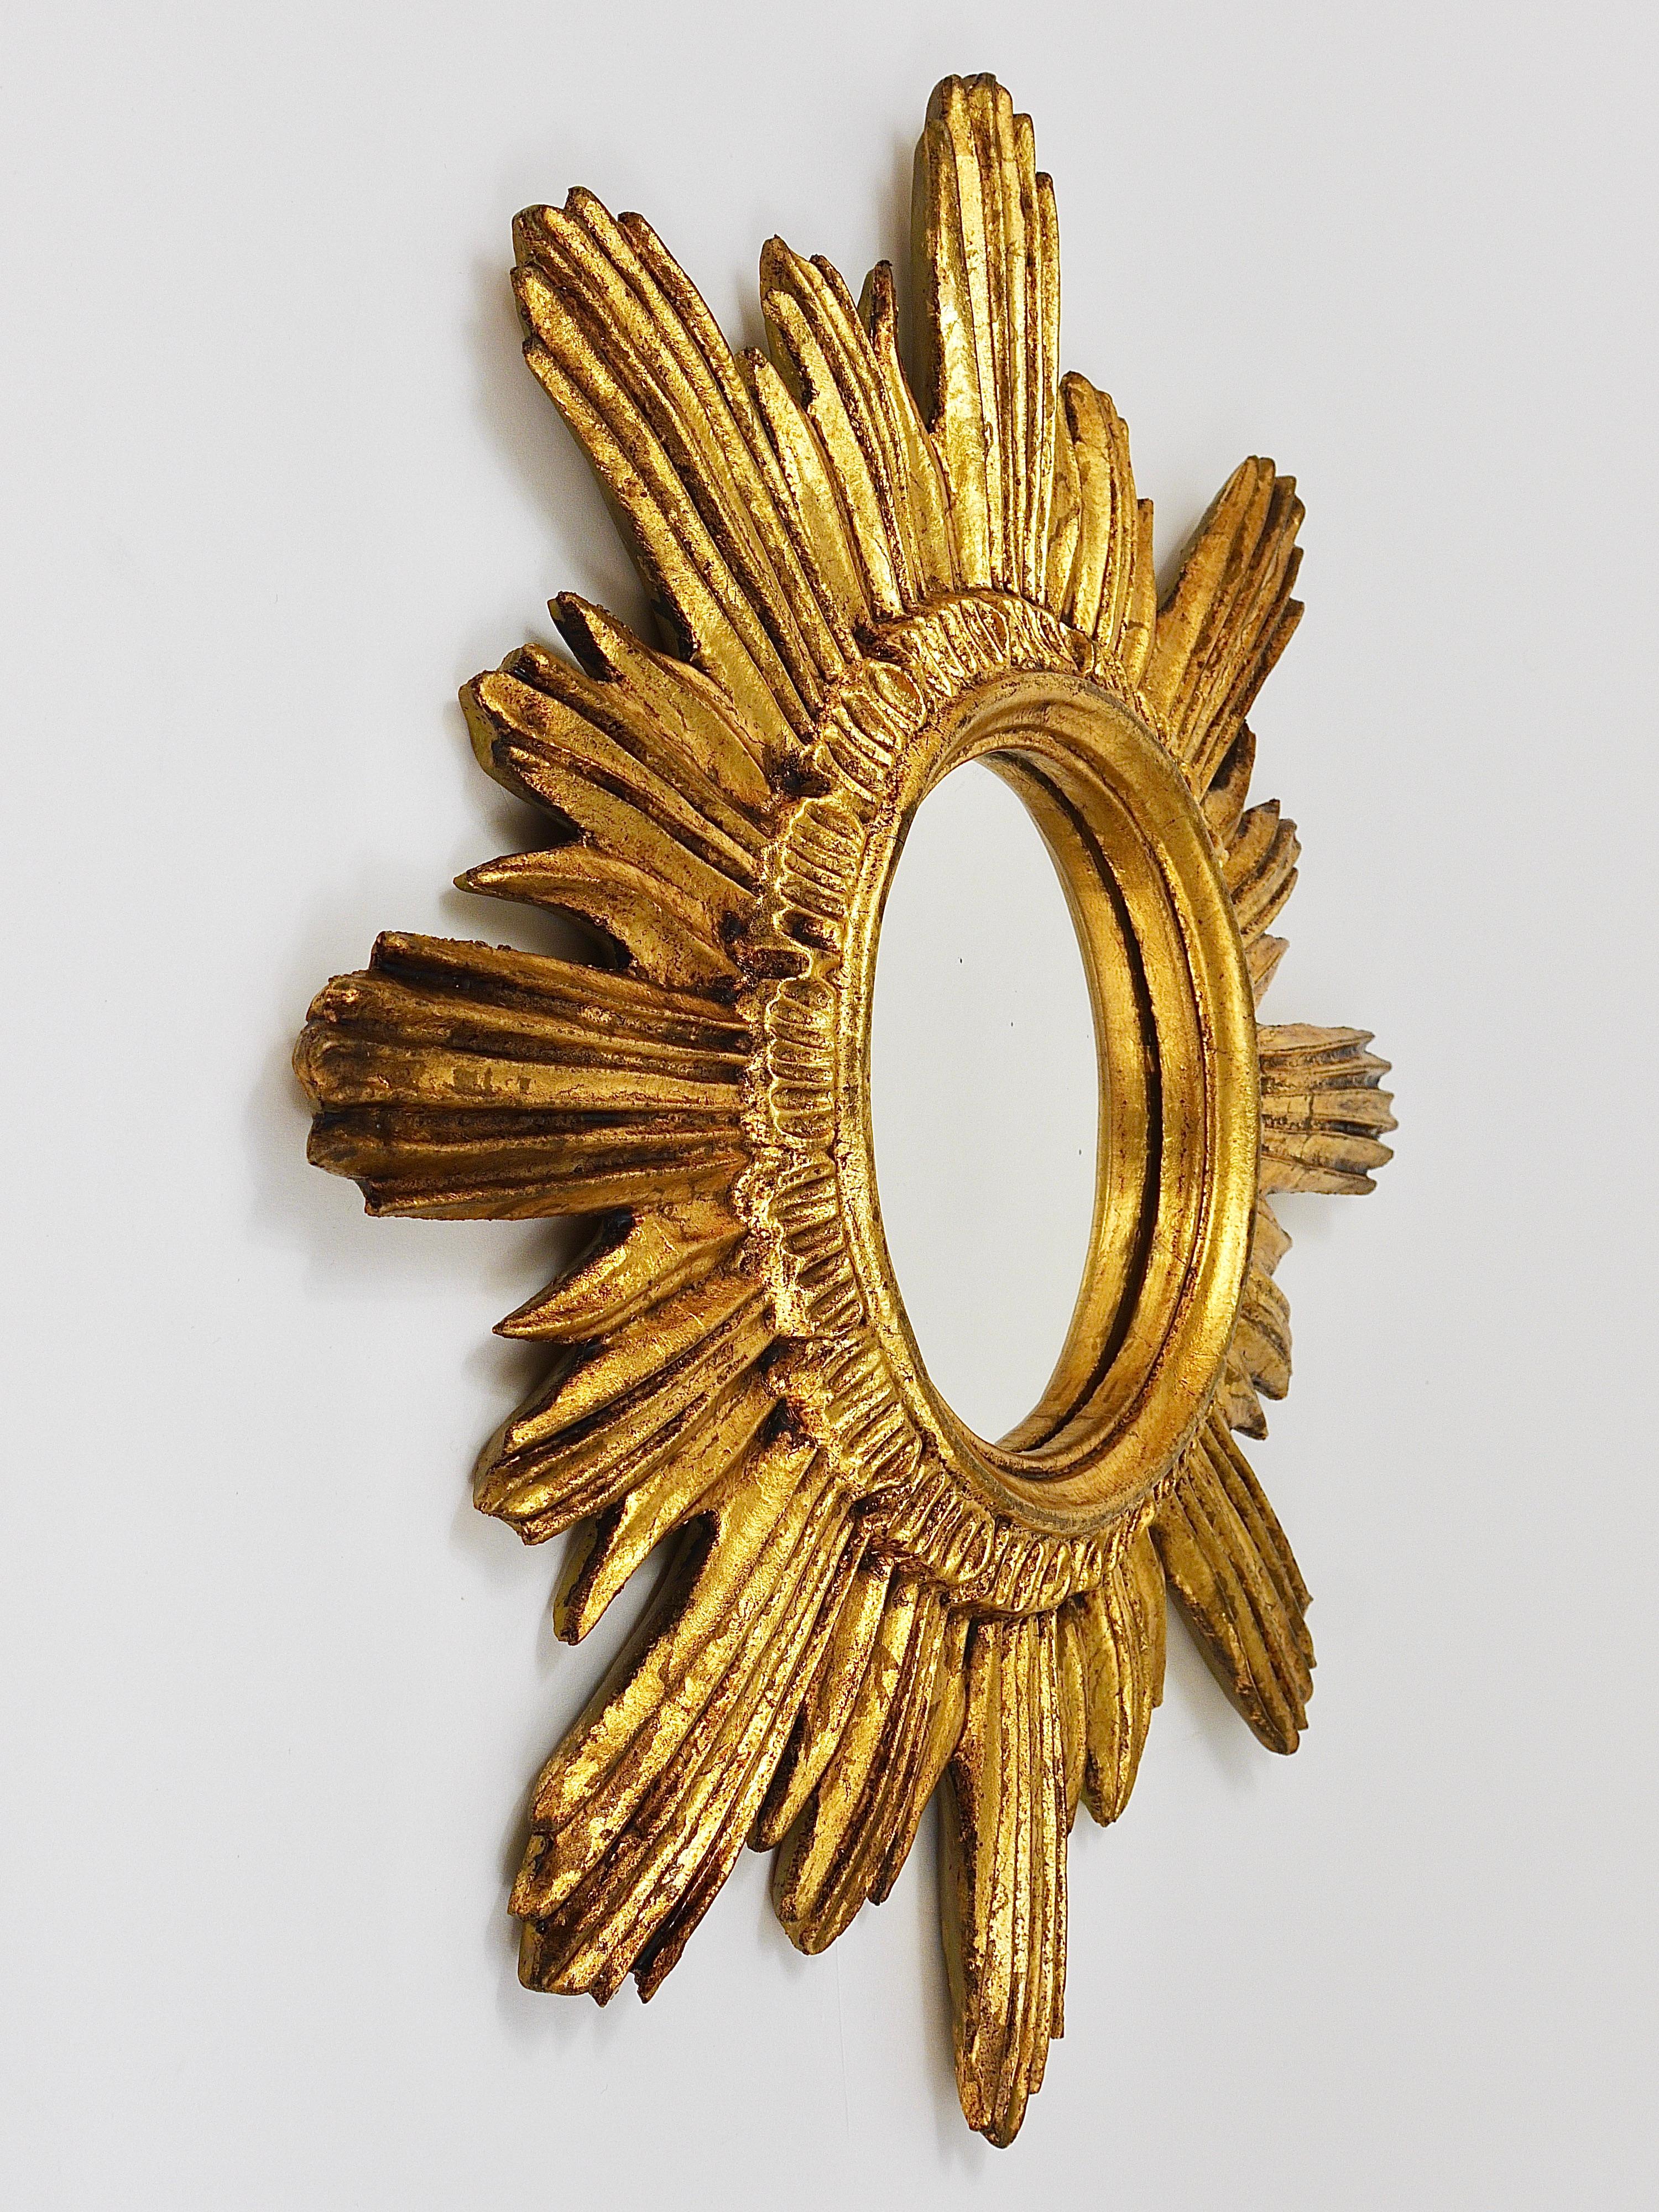 A very beautiful decorative golden mid-century sunburst starburst mirror, made in France in the 1950s. Made of resin still with original mirror glass. Please notice, that there are 3 or 4 very fine and very small black spots in the mirror glass,